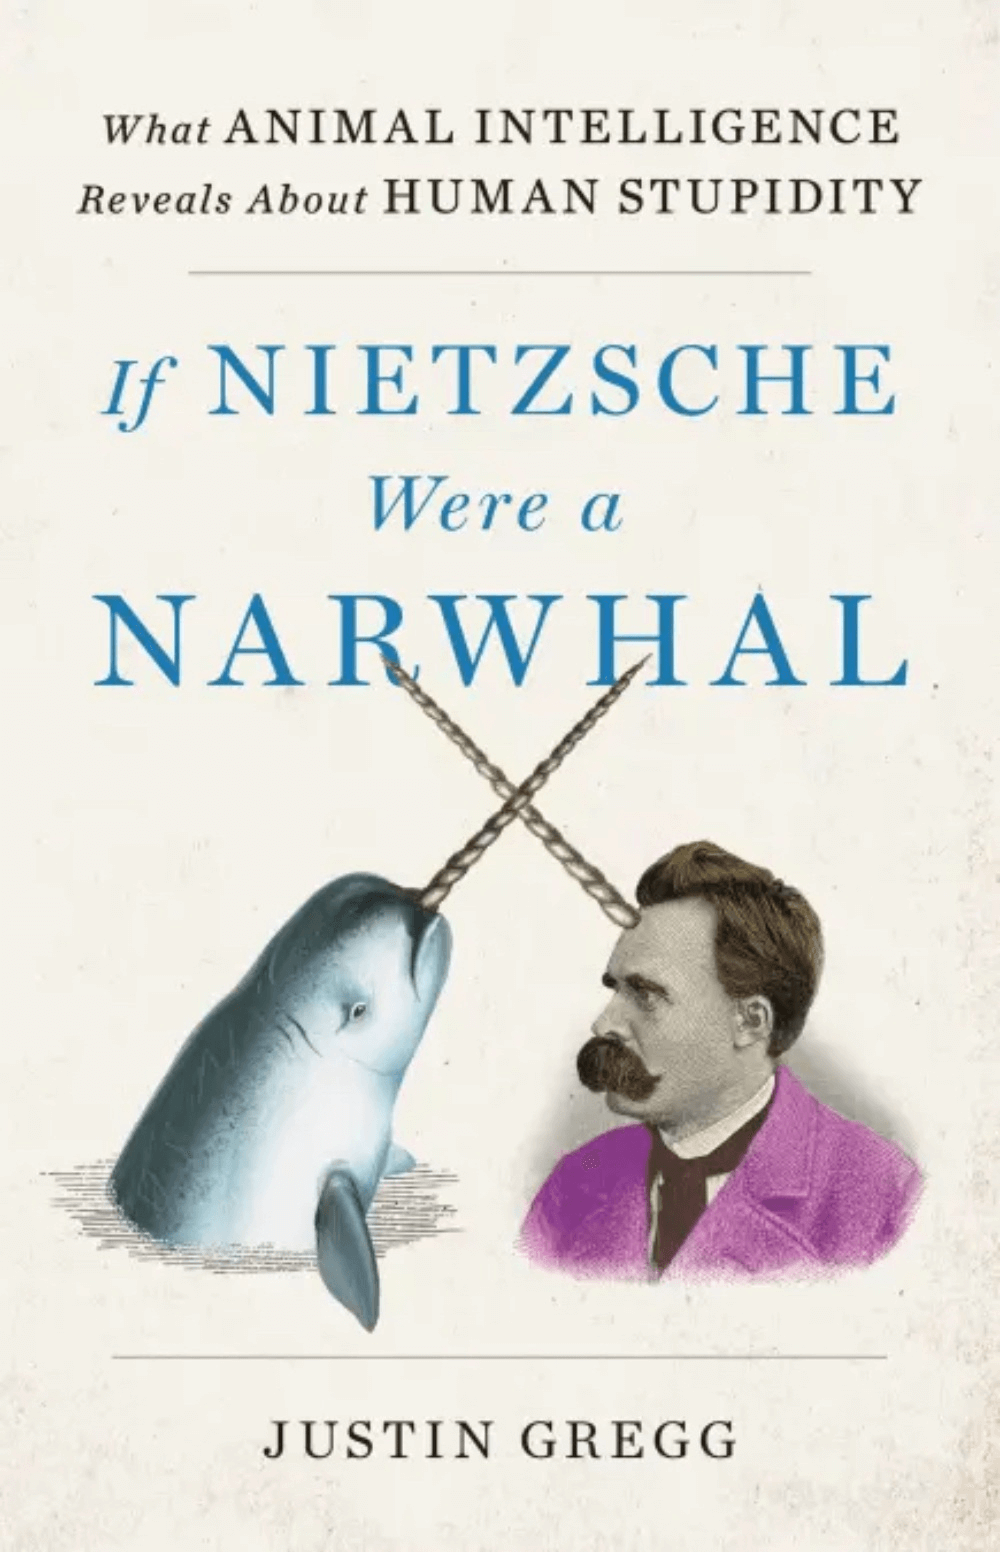 nietzche narwhal resized small